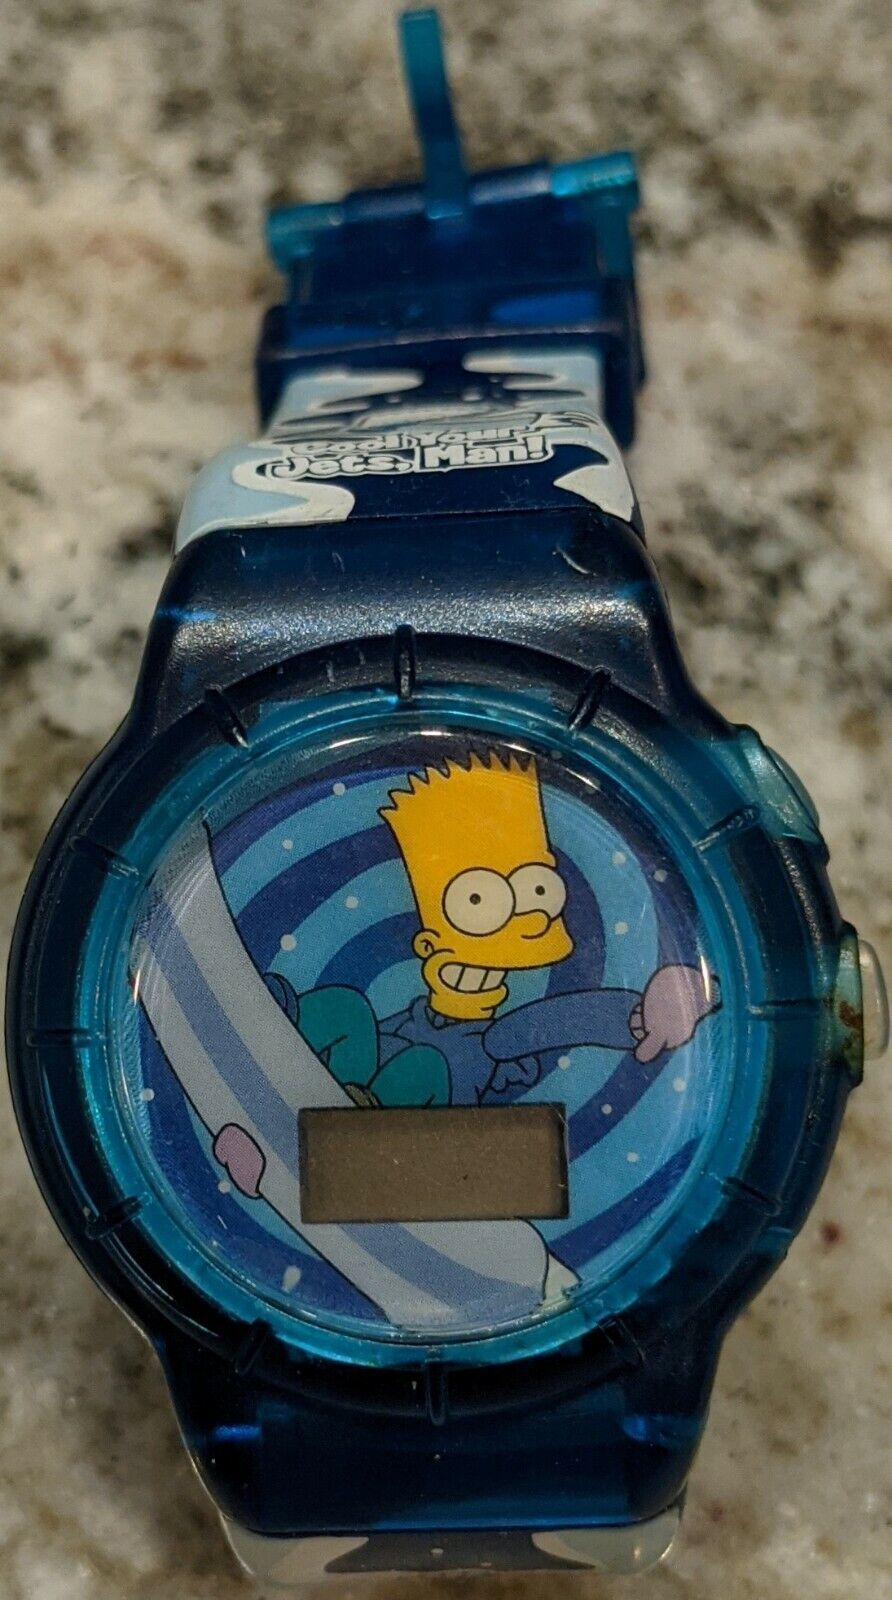 Primary image for 2002 Burger King The Simpsons Talking Bart Wrist Watch, UNTESTED